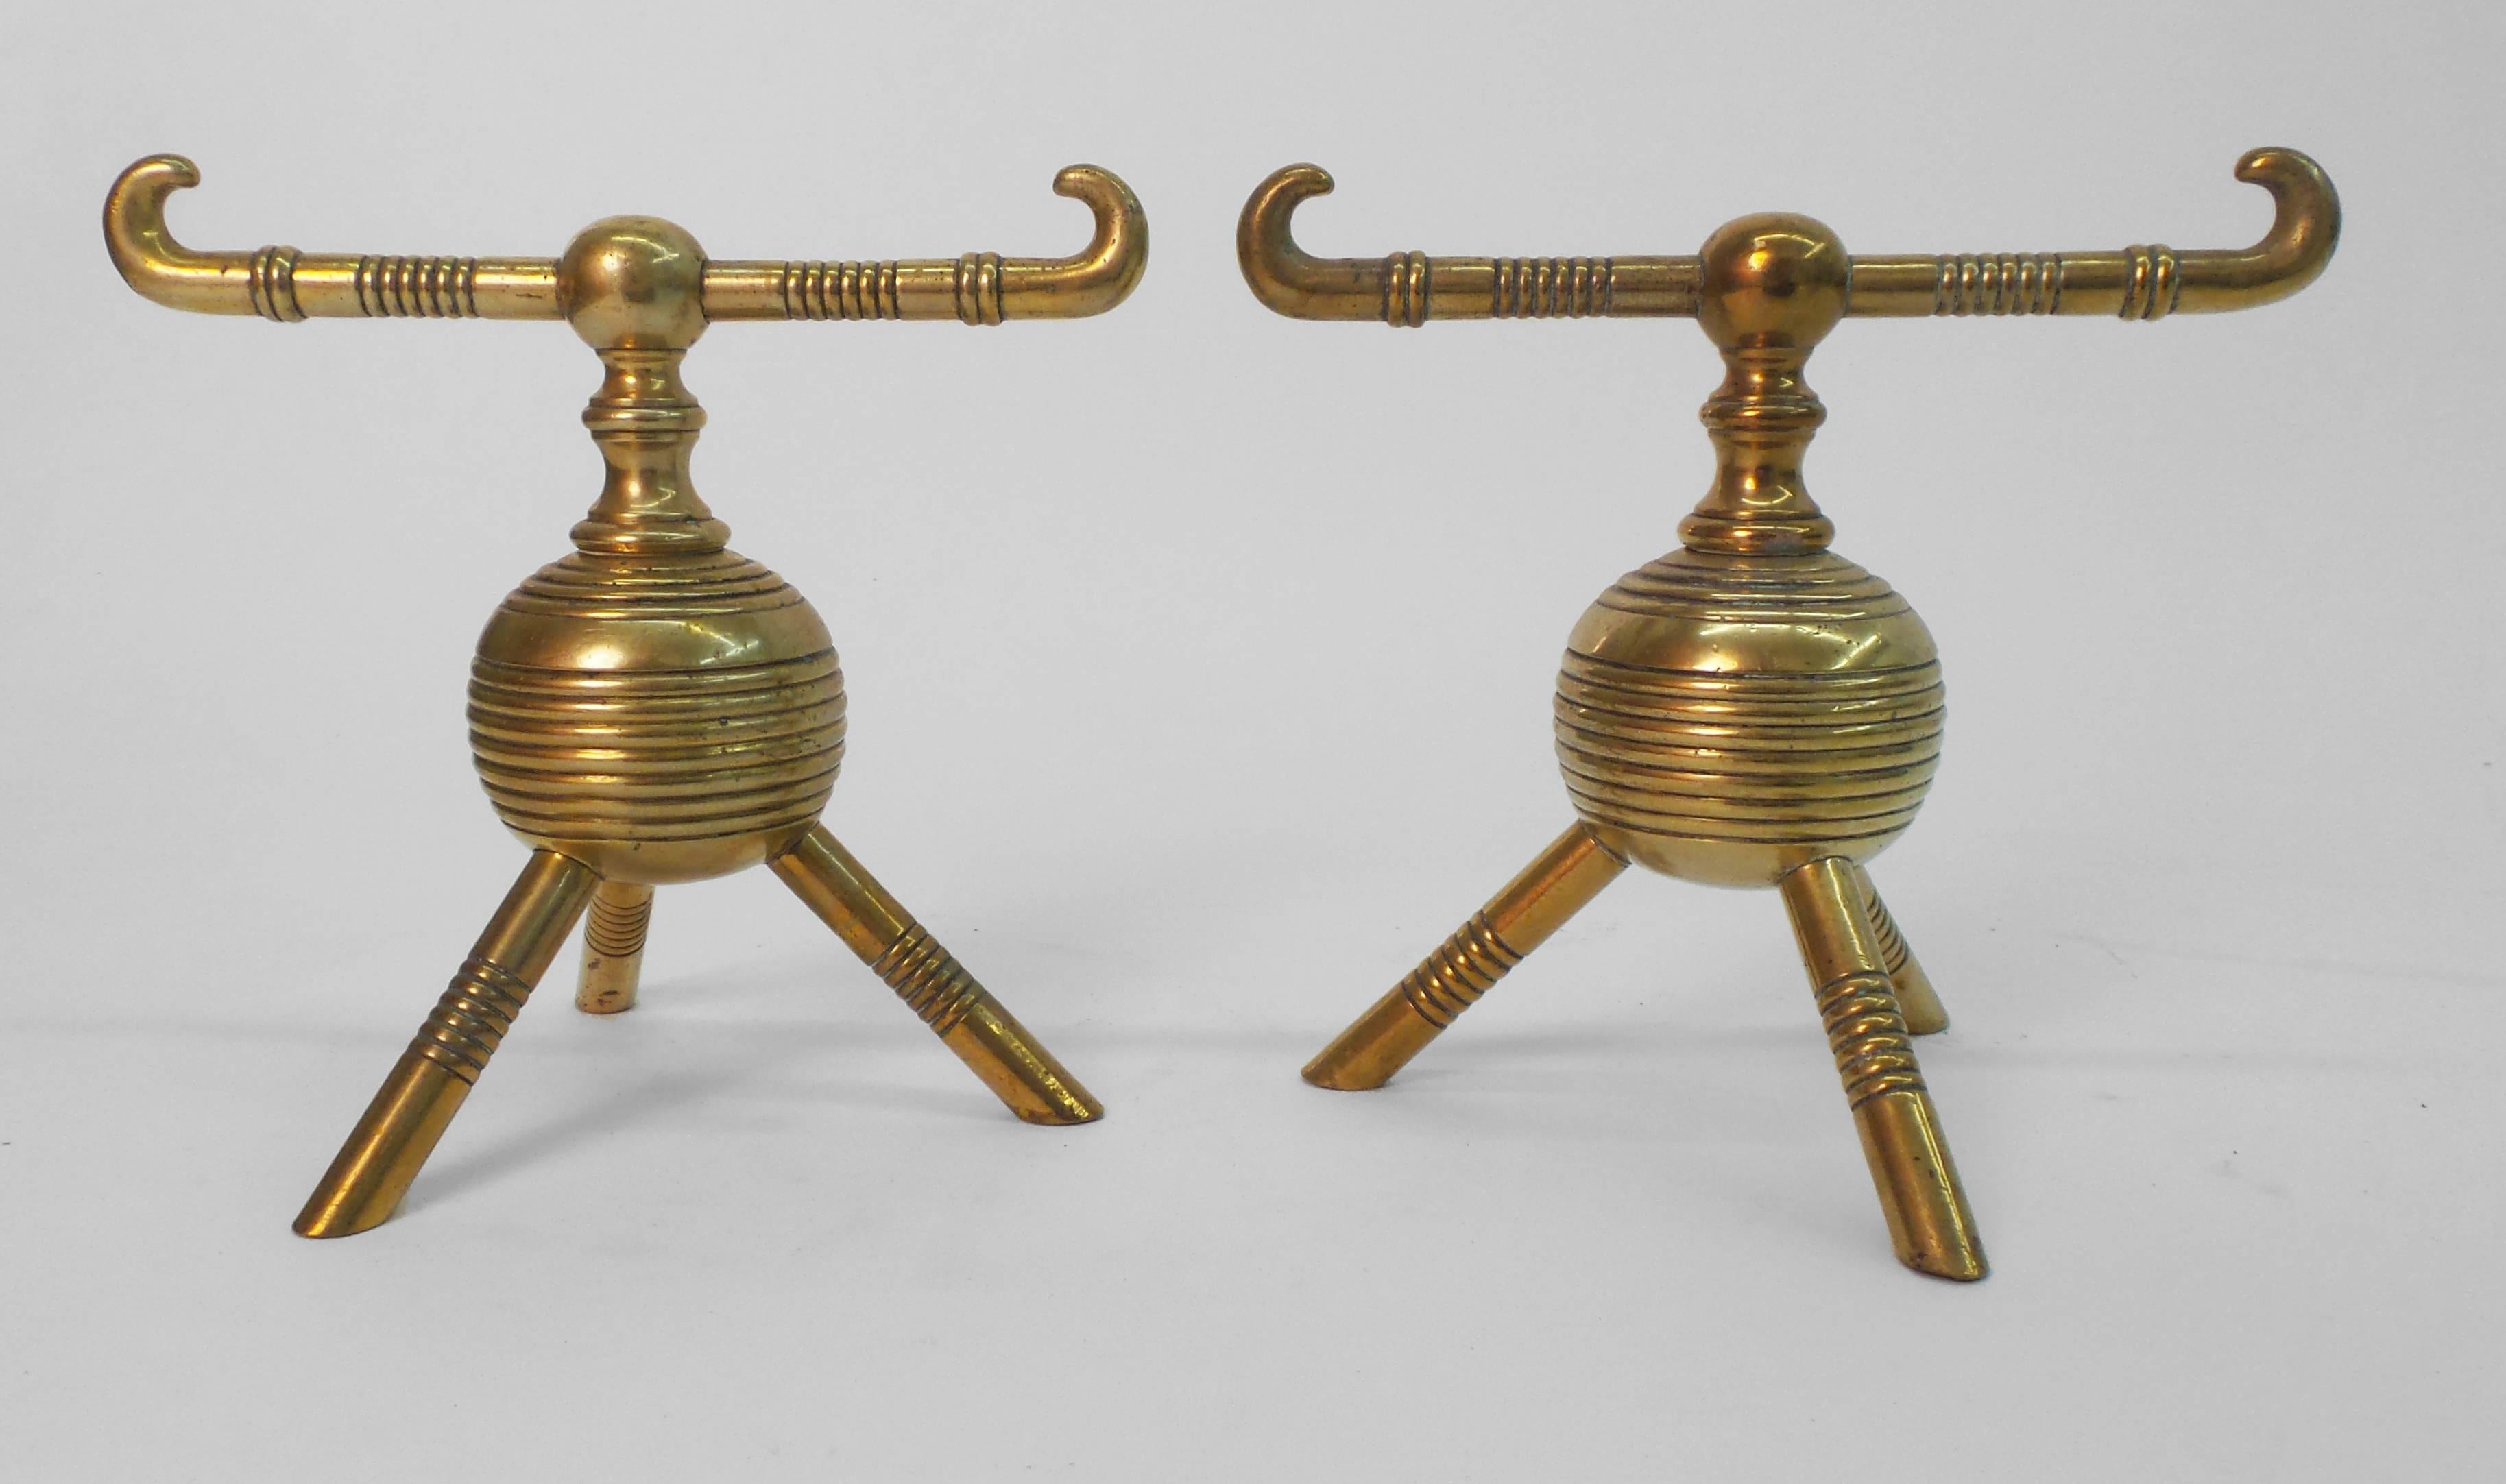 A pair of English, Aesthetic period brass fire dogs having ribbed bodies supported on three feet. Design attributed to Dr. Christopher Dresser made by Benham & Froud, circa 1890.